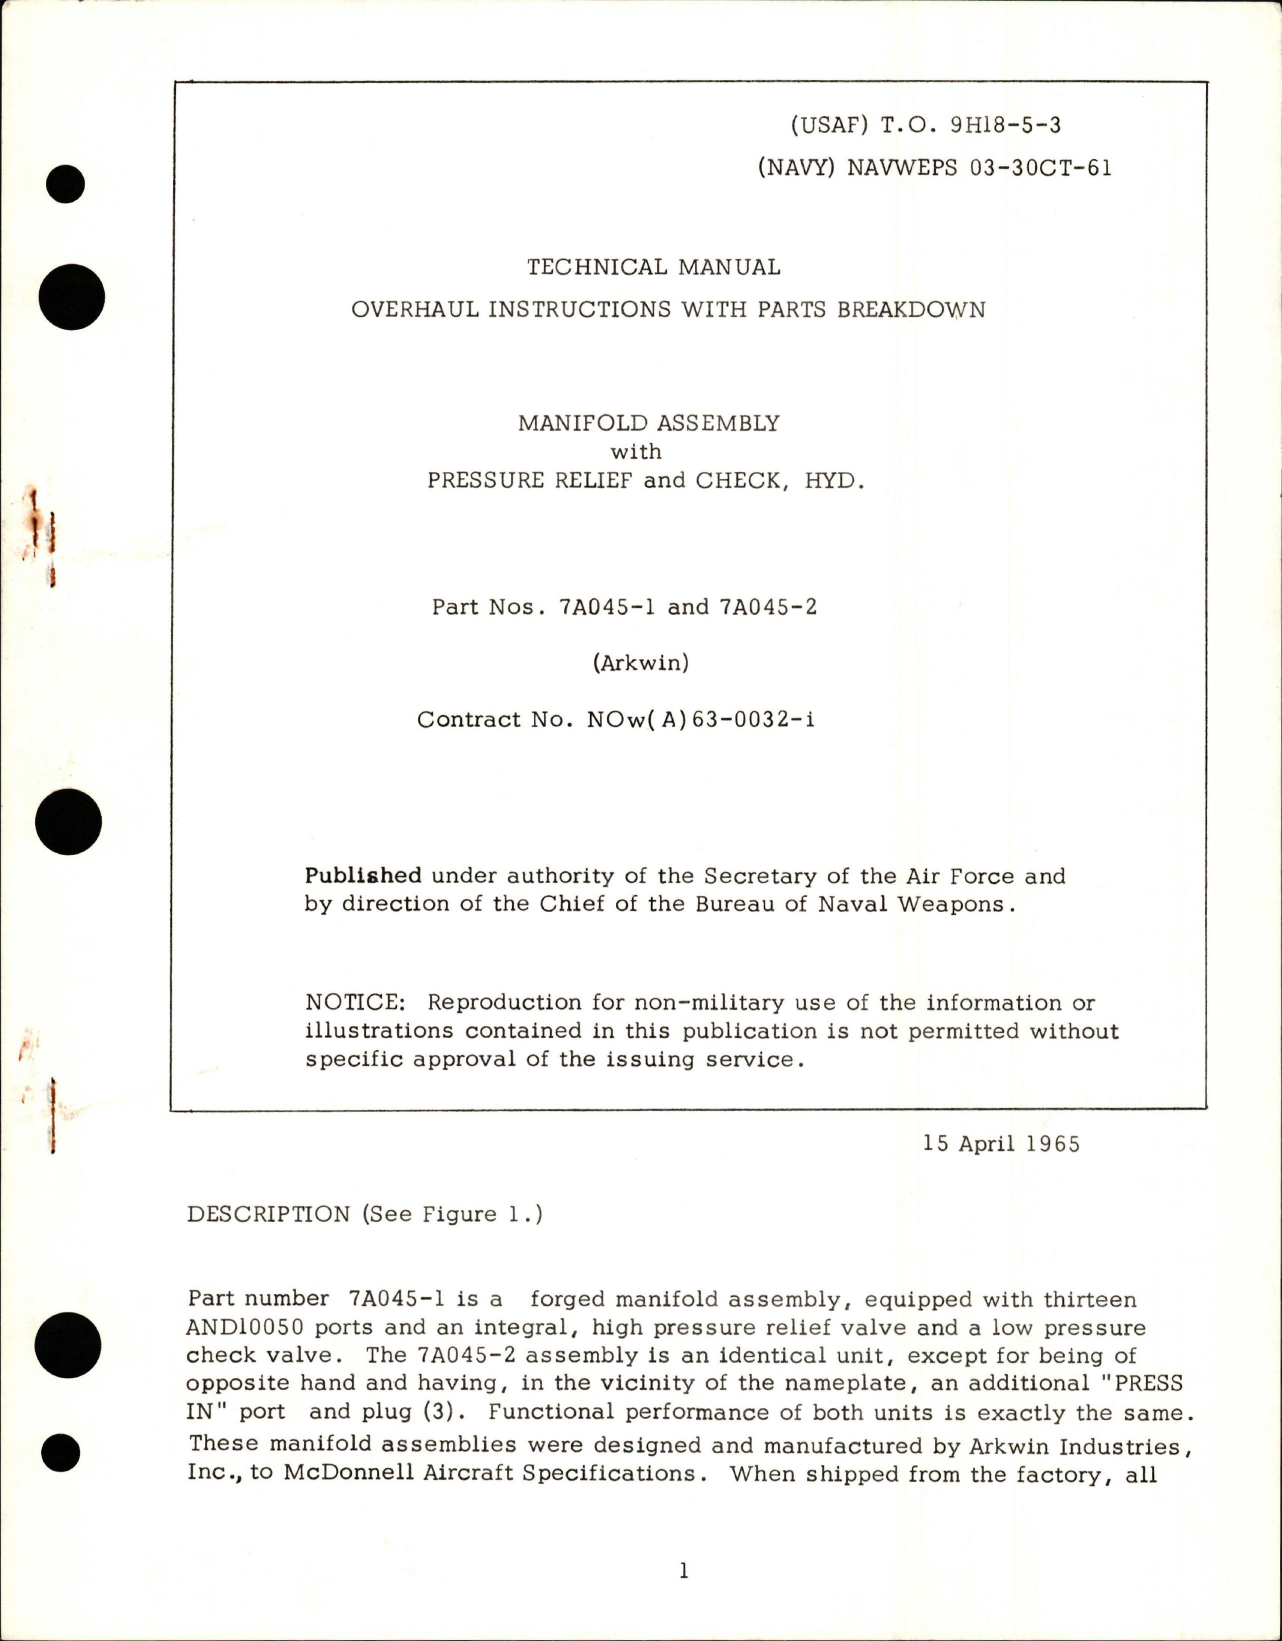 Sample page 1 from AirCorps Library document: Overhaul Instructions with Parts for Manifold Assembly w Pressure Relief and Check HYD - Parts 7A045-1 and 7A045-2